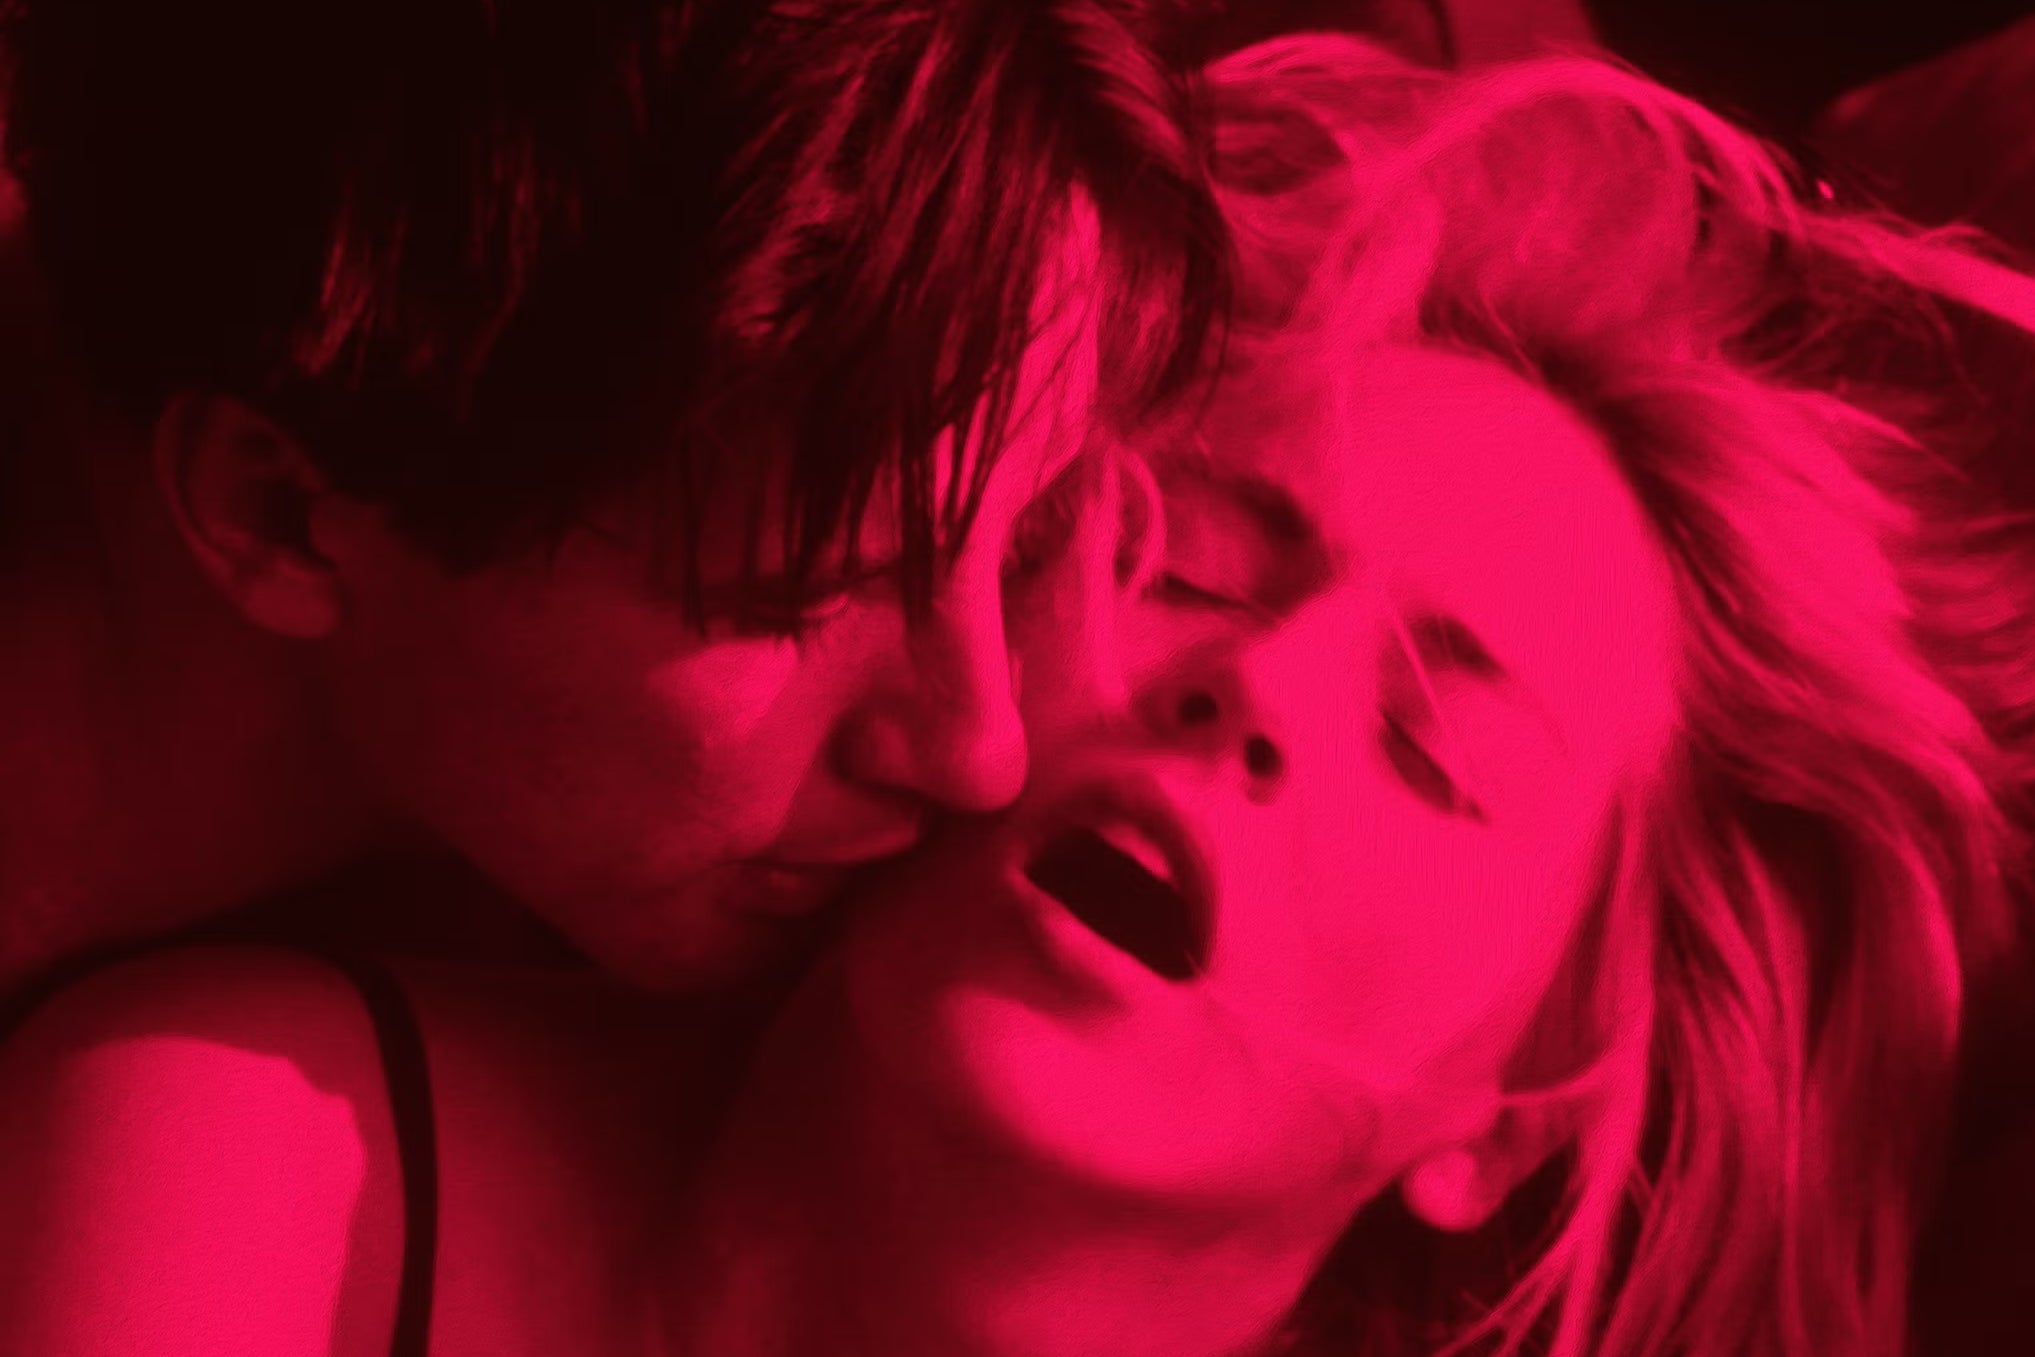 Ice picks, full frontals and the grand, urgent return of the erotic thriller The Independent